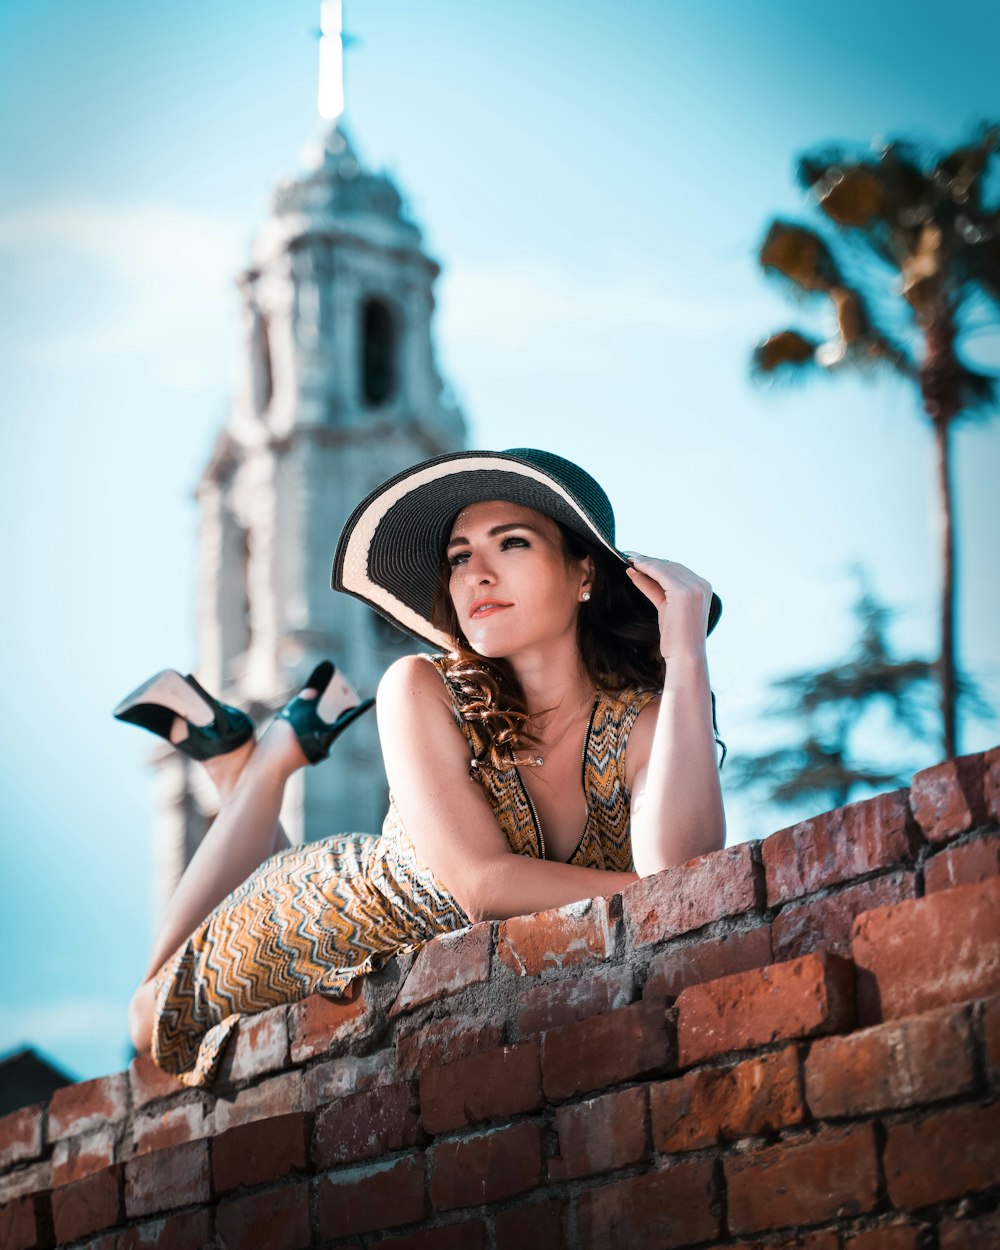 a woman in a hat and dress sitting on a brick wall